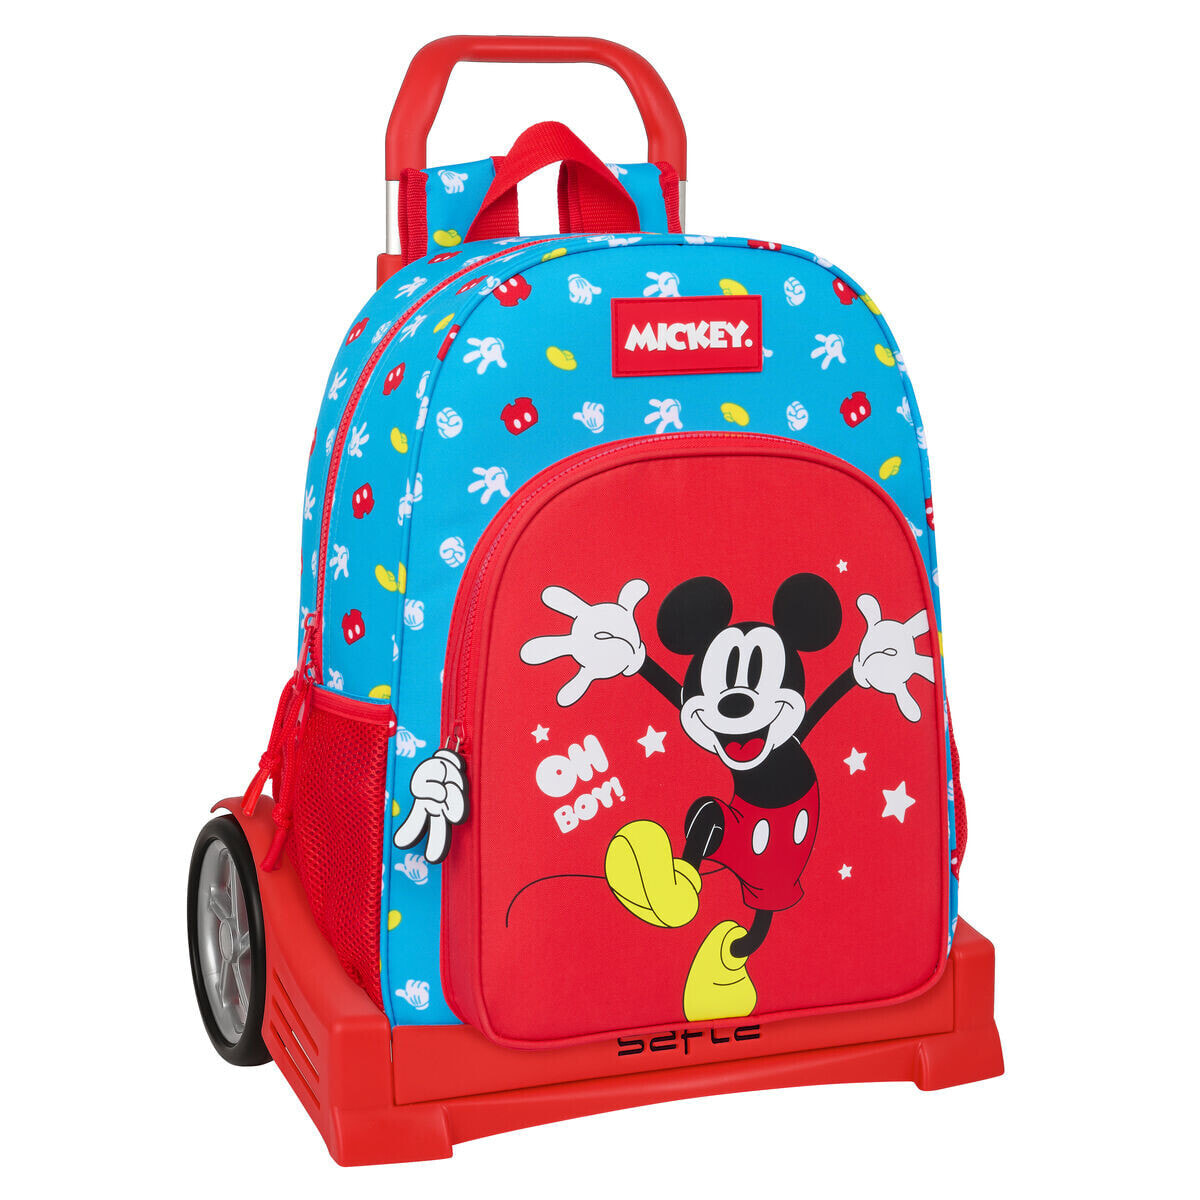 School Rucksack with Wheels Mickey Mouse Clubhouse Fantastic Blue Red 33 x 42 x 14 cm